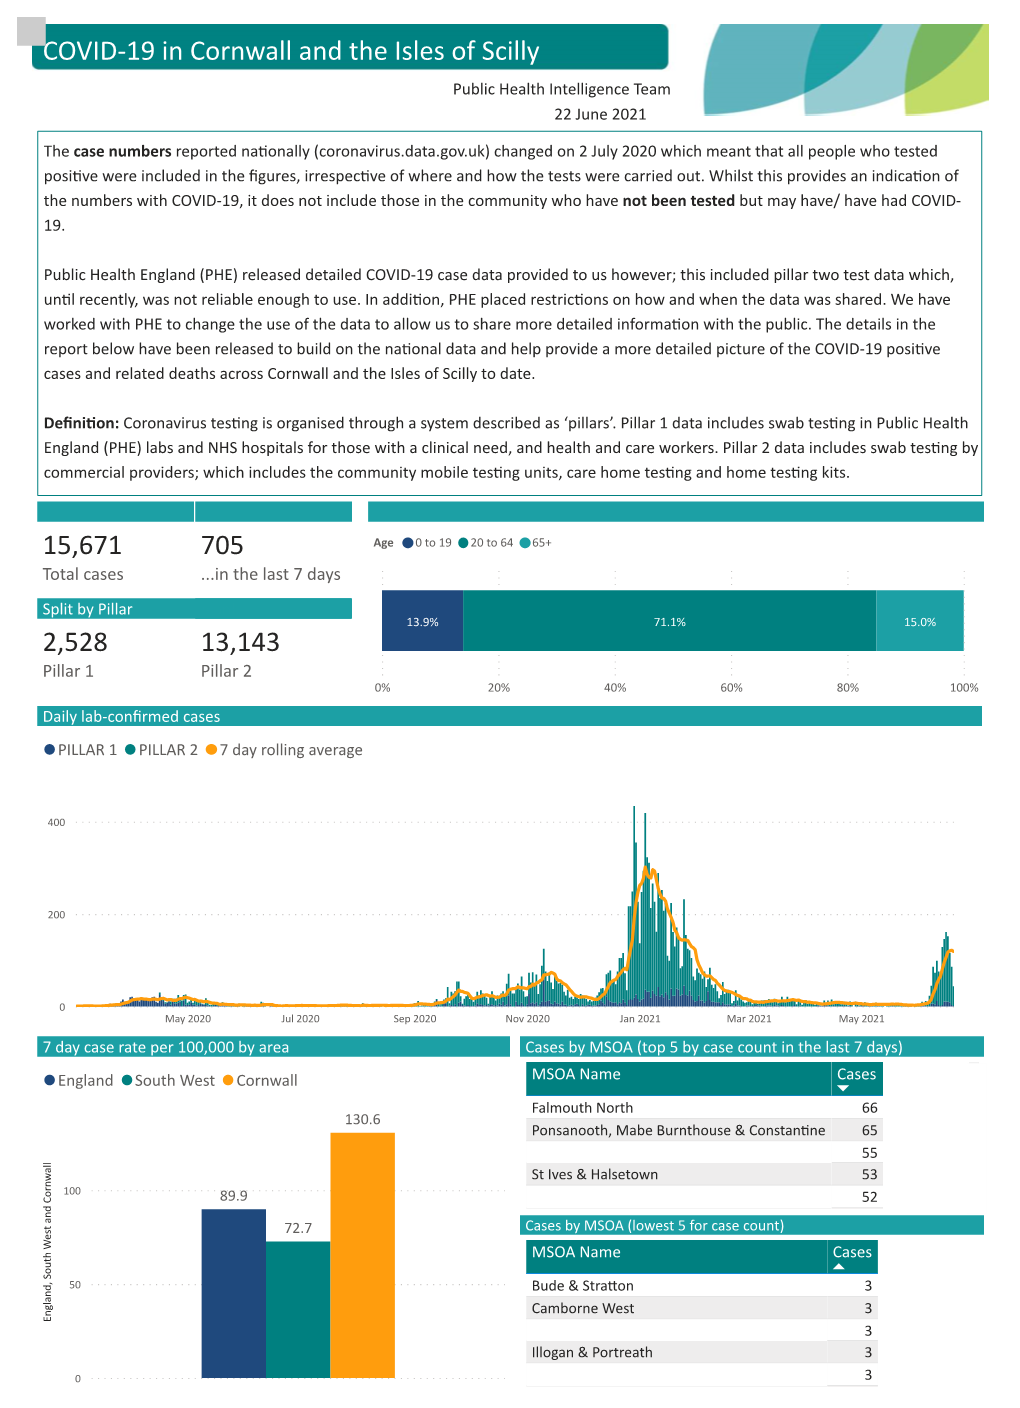 Cornwall and Isles of Scilly COVID 19 Dashboard